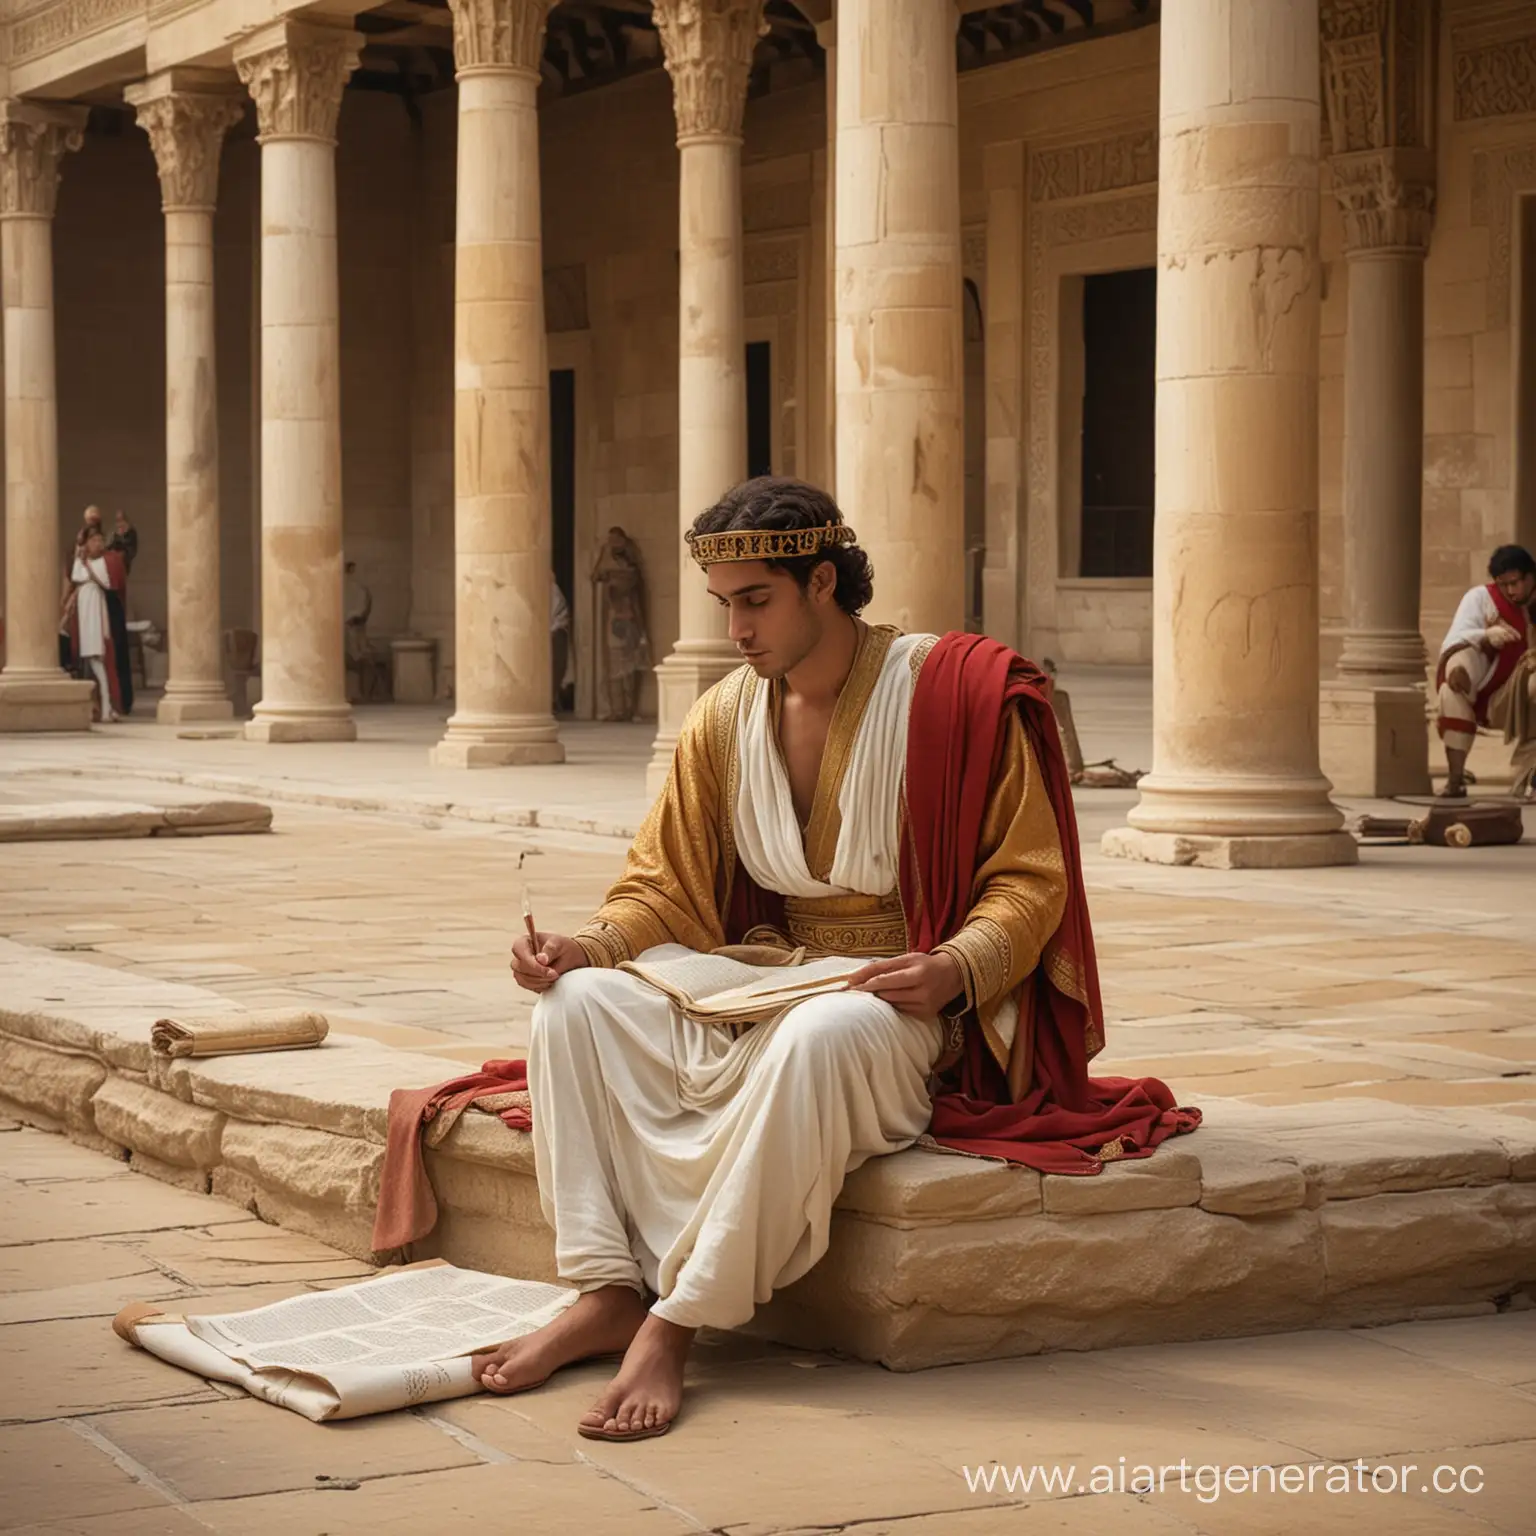 Young-King-Solomon-Writing-Scrolls-in-the-Palace-Courtyard